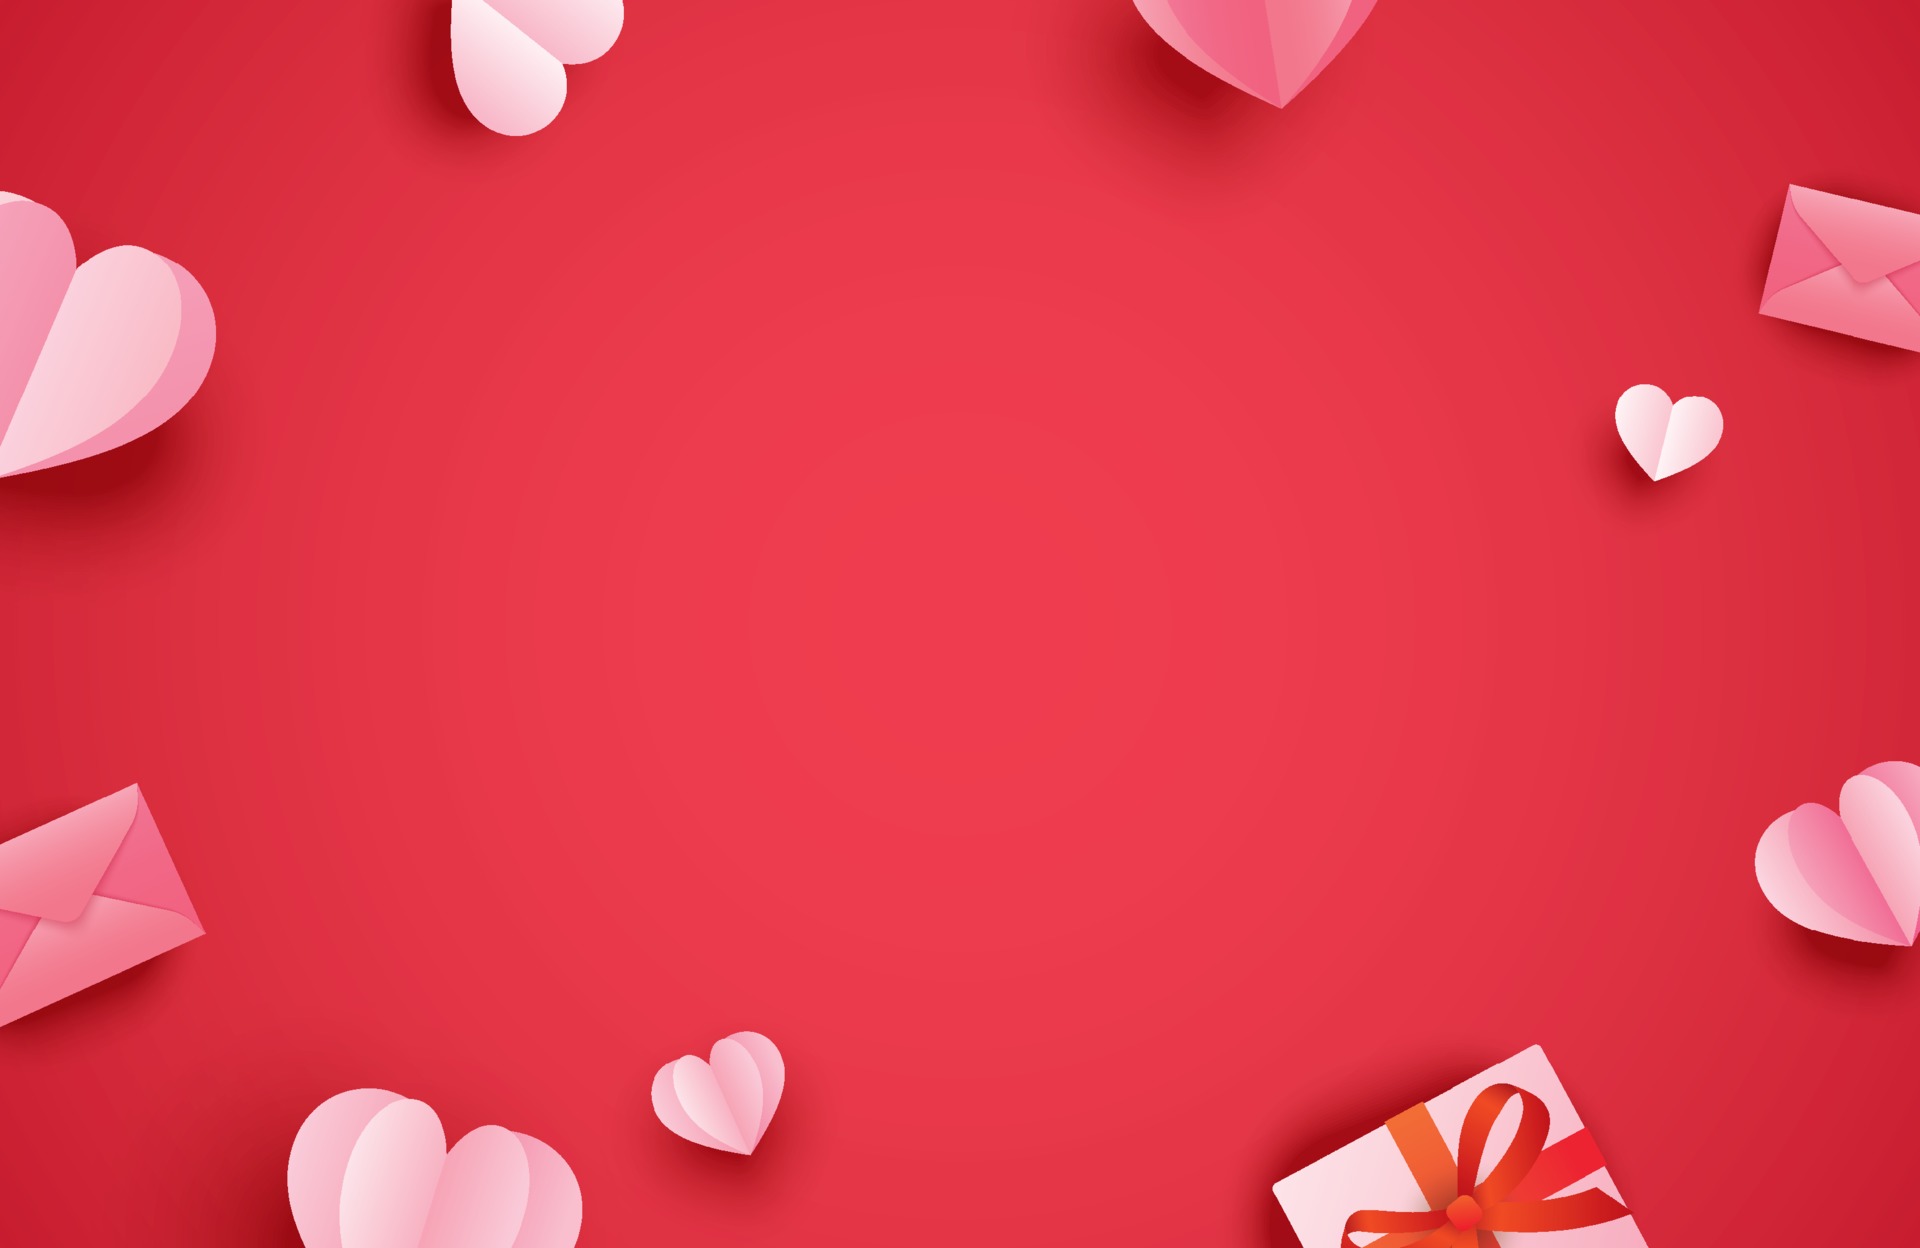 Happy valentines day greeting cards with paper hearts on red pastel background